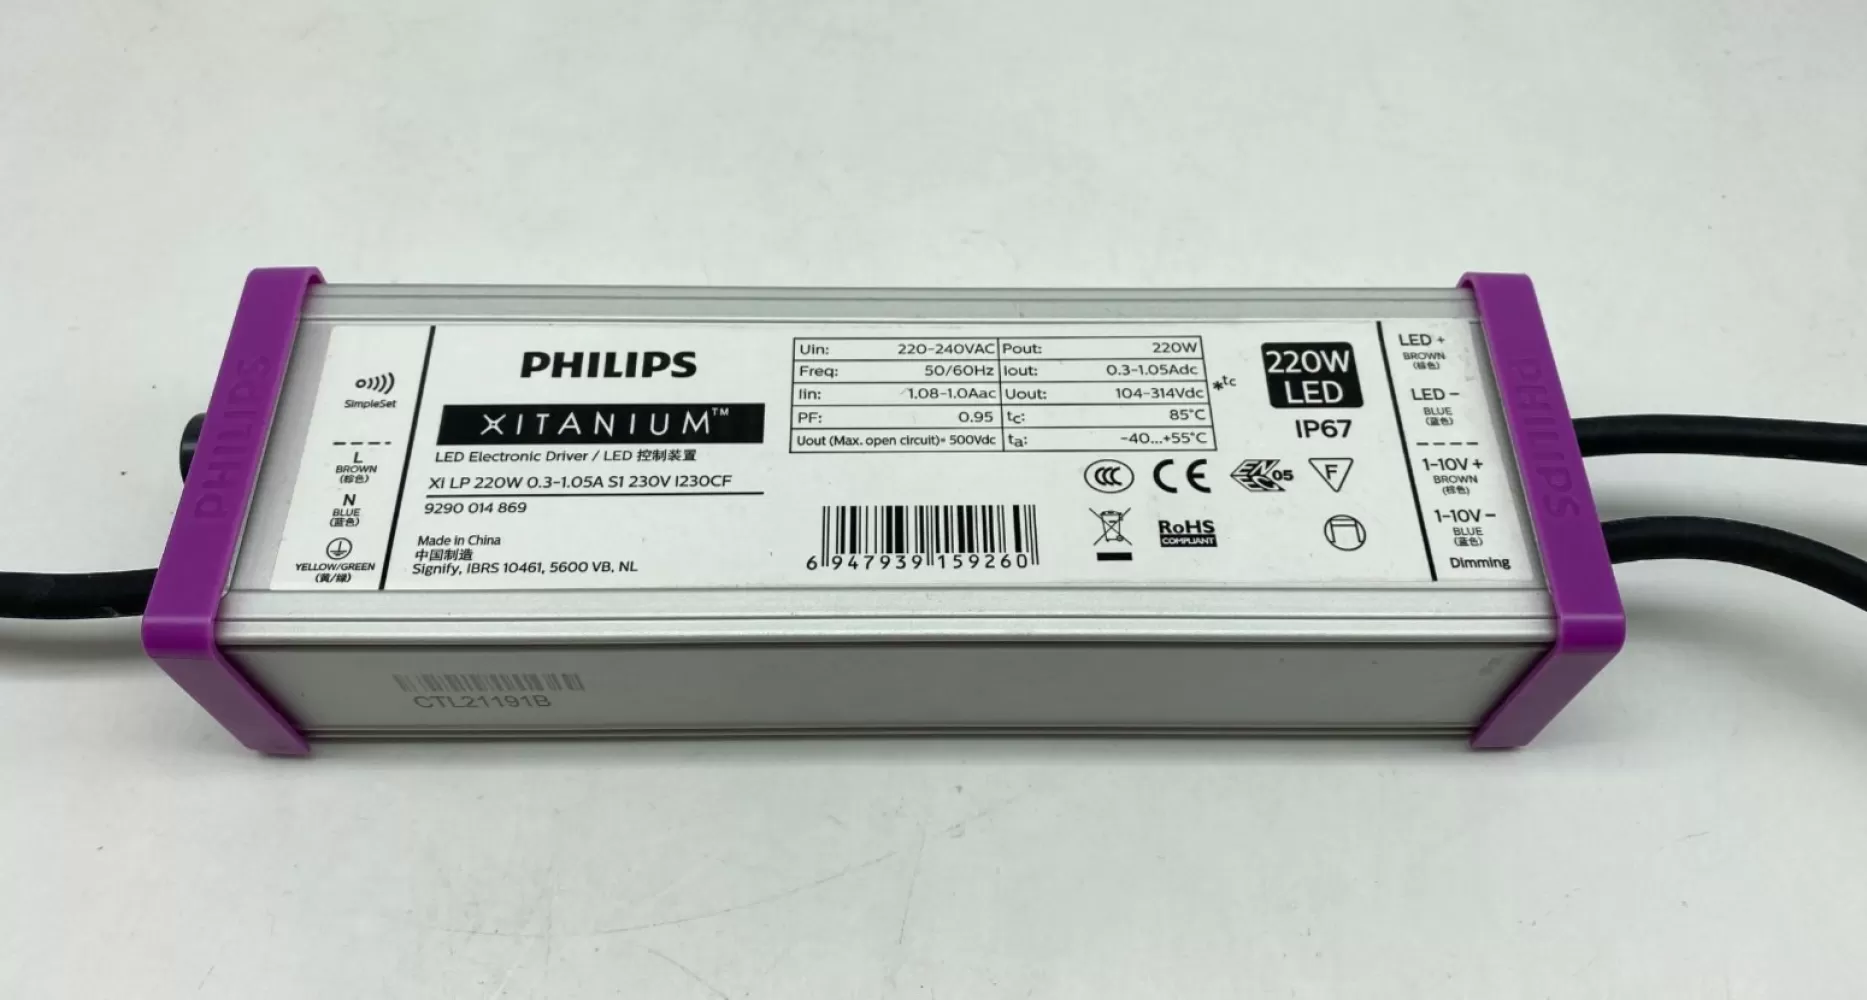 PHILIPS XITANIUM XILP 220W 0.3A-0.7A-1.05A S1 230V L230 IP67 1-10V DIMMABLE LED DRIVER/BALLAST 9290014869